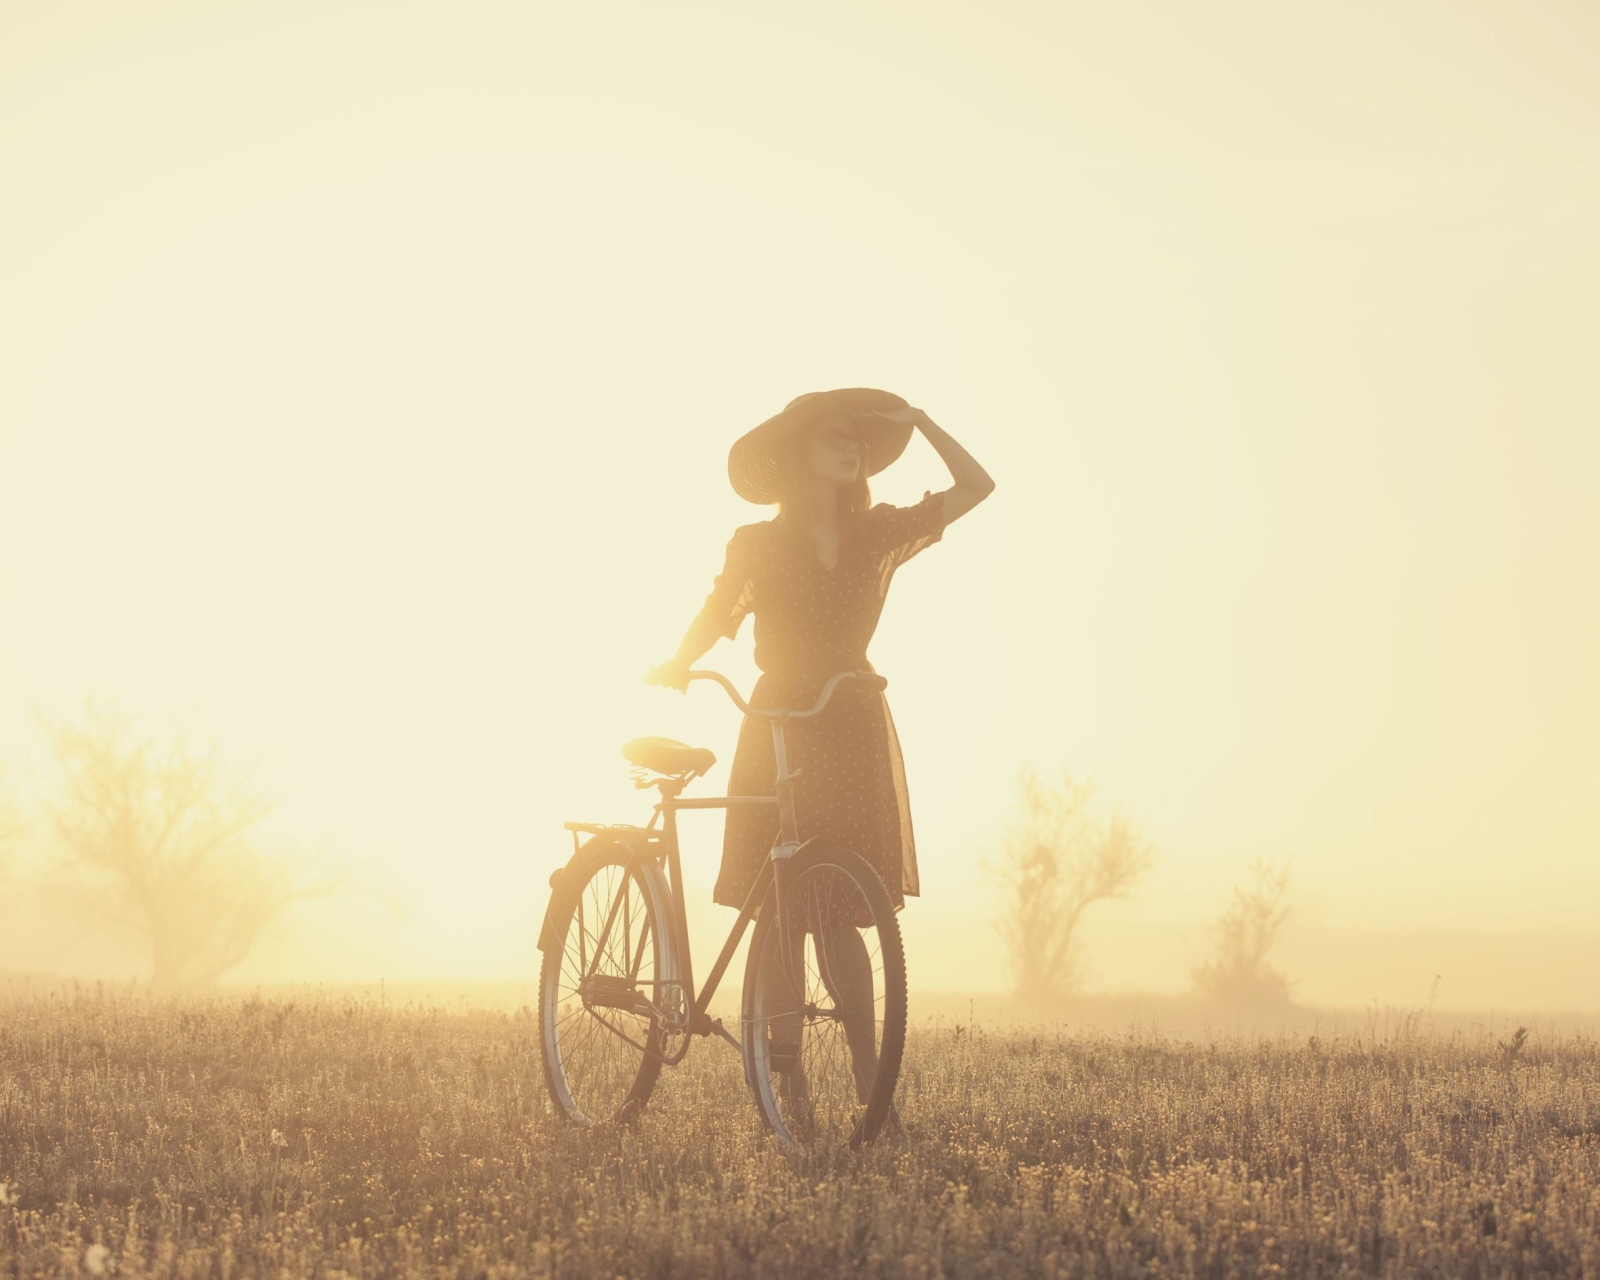 Das Girl And Bicycle On Misty Day Wallpaper 1600x1280